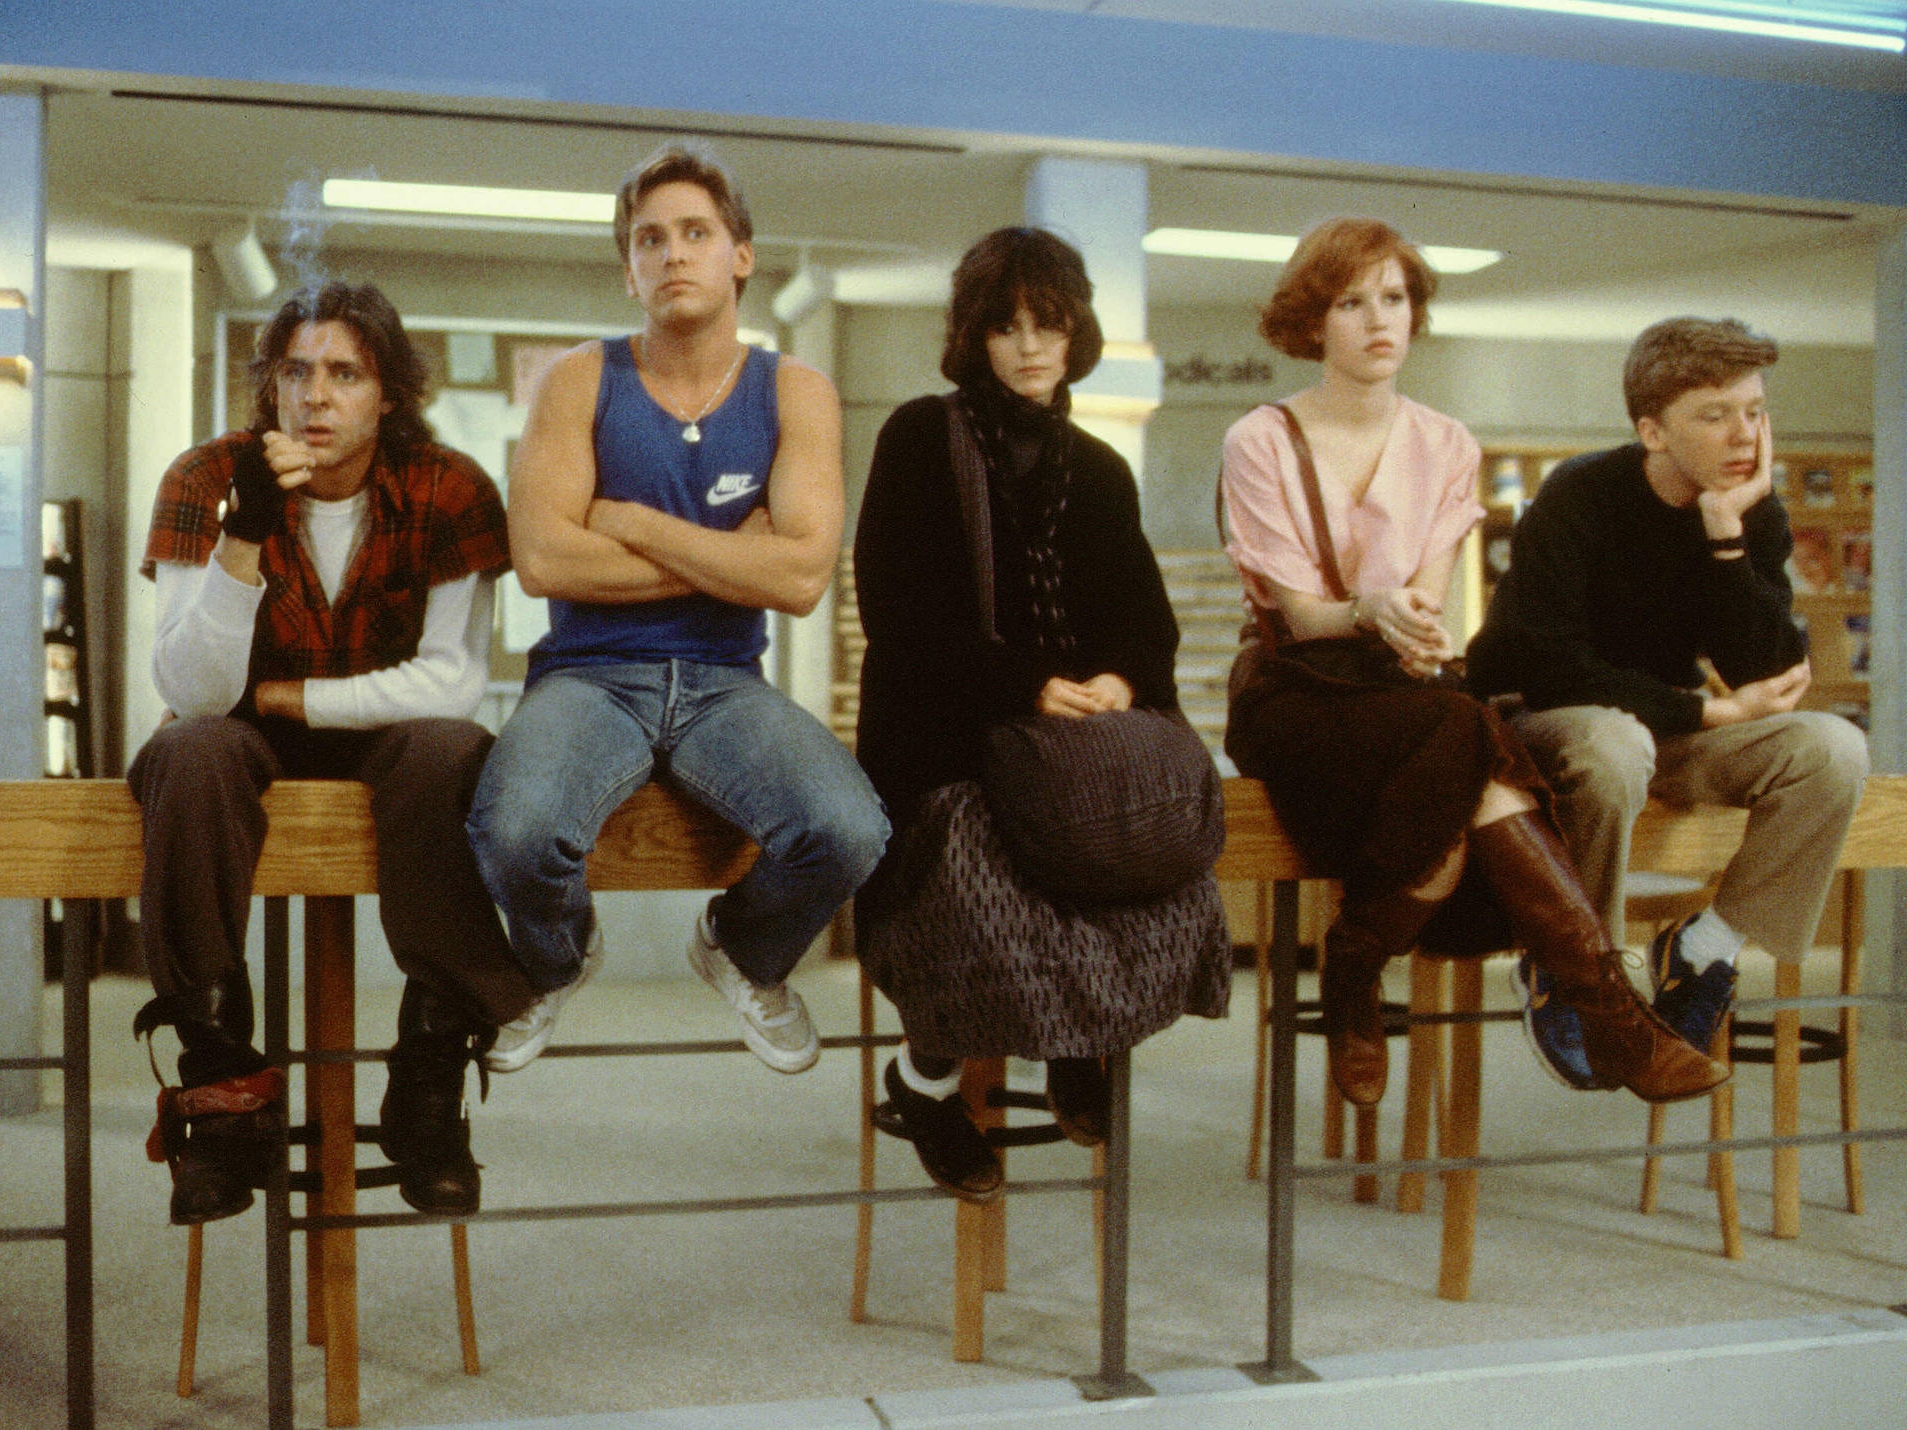 Still from the film The Breakfast Club depicting the five main characters sitting on a railing in a library.